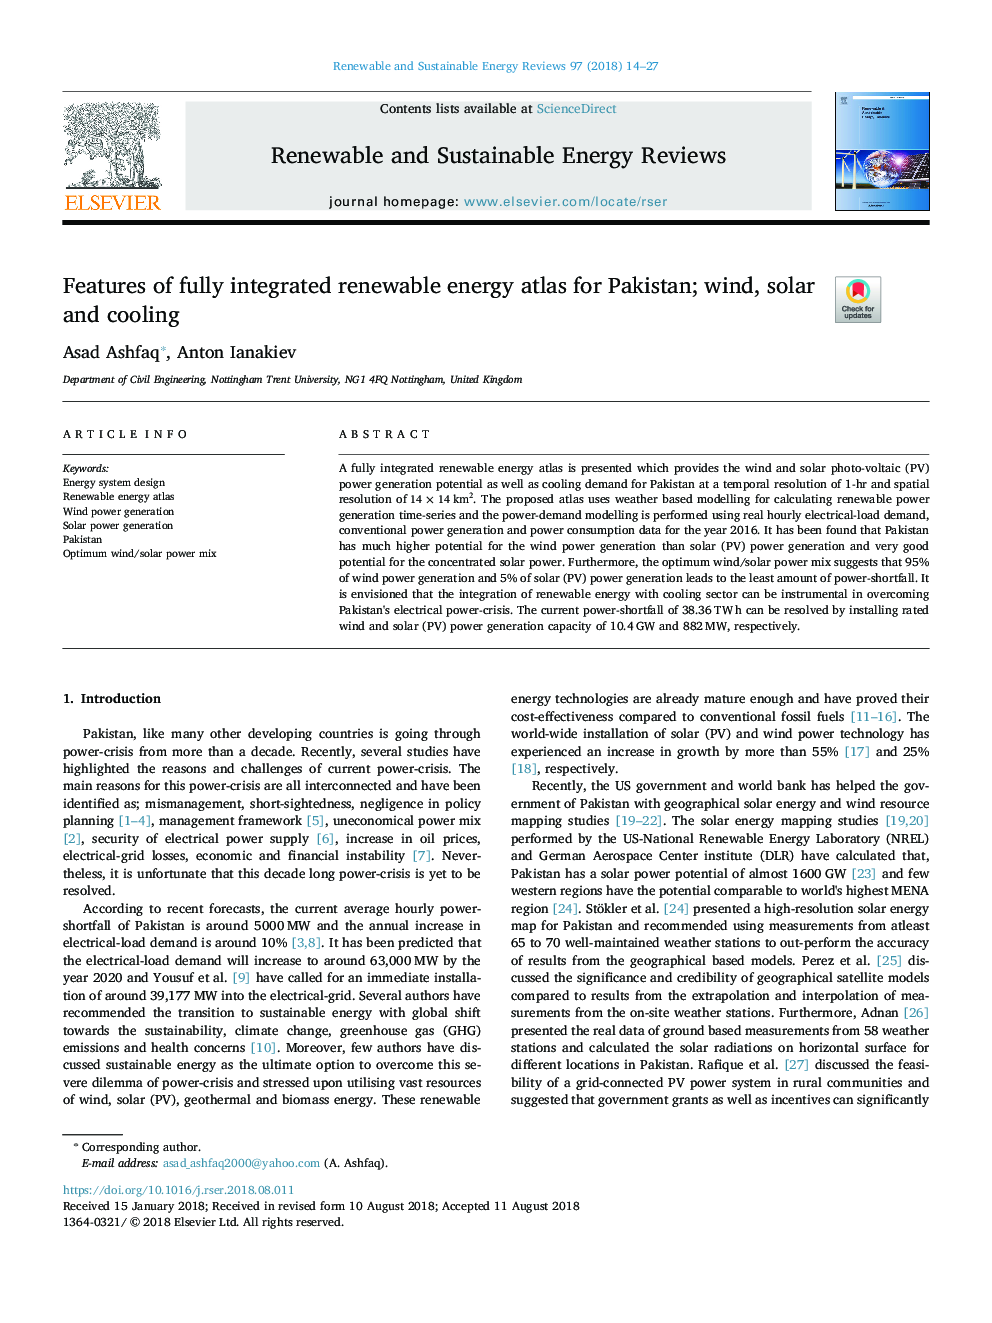 Features of fully integrated renewable energy atlas for Pakistan; wind, solar and cooling